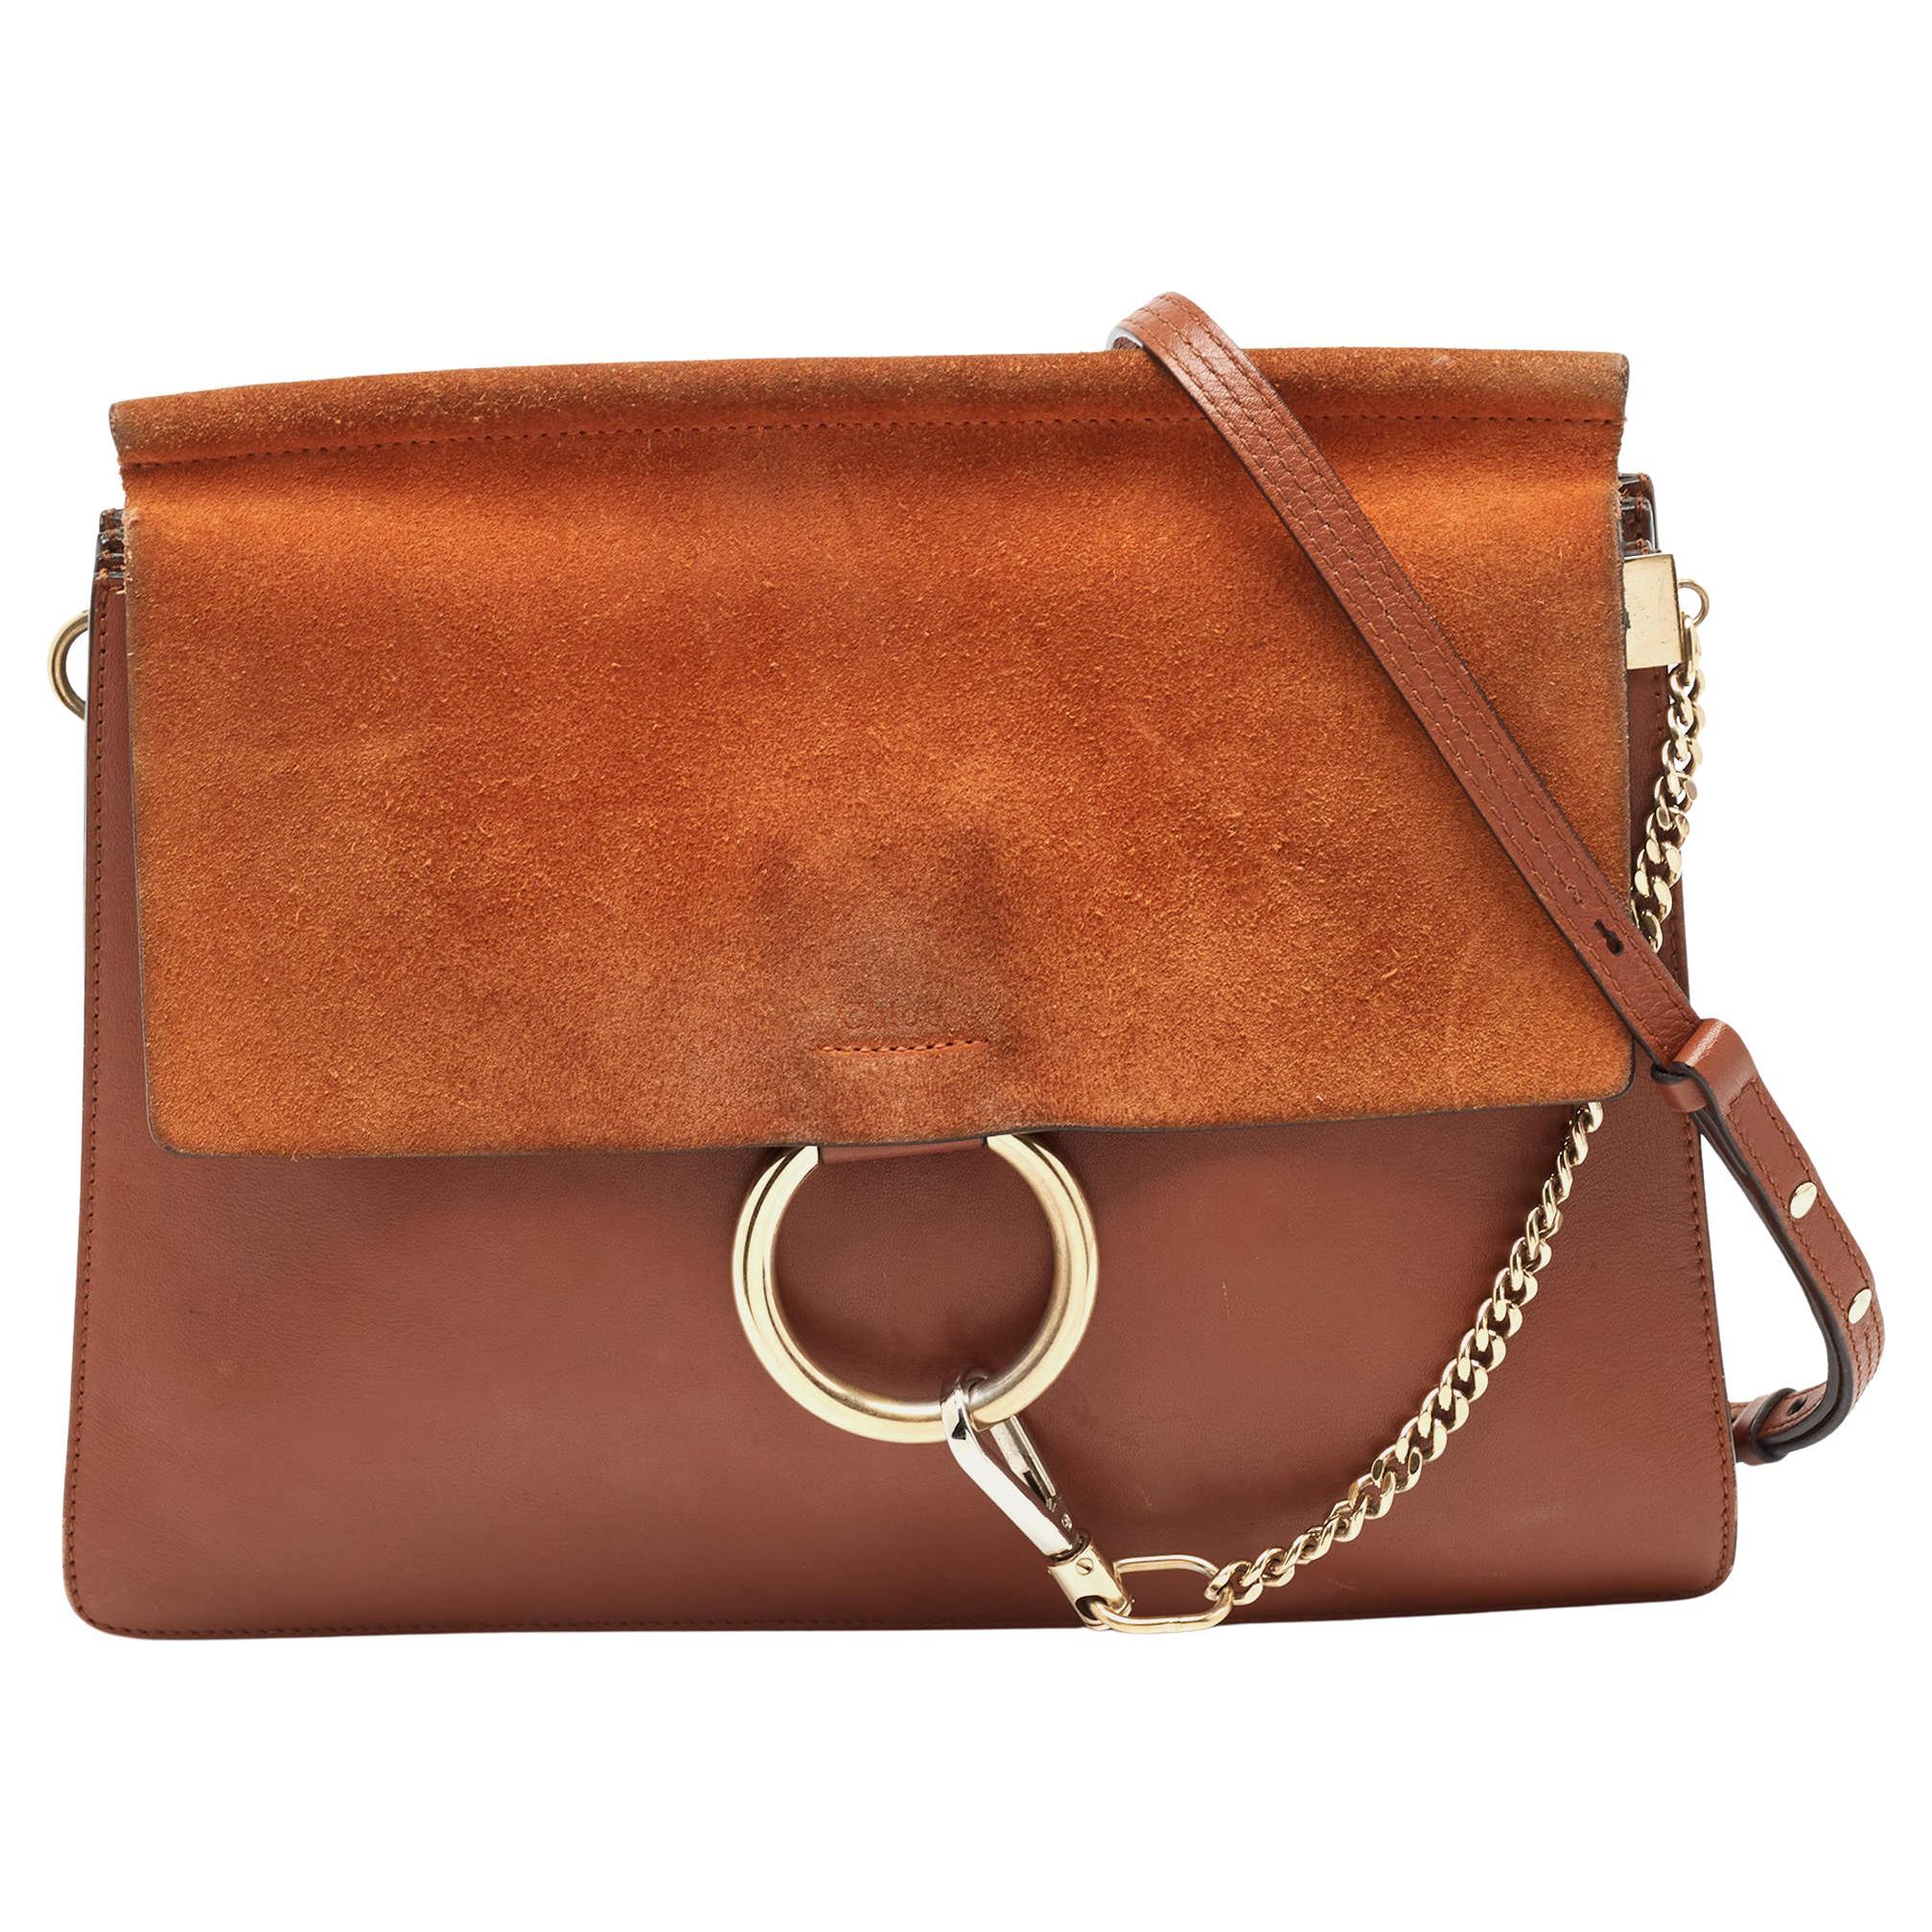 Chloe Brown Leather and Suede Medium Faye Shoulder Bag For Sale